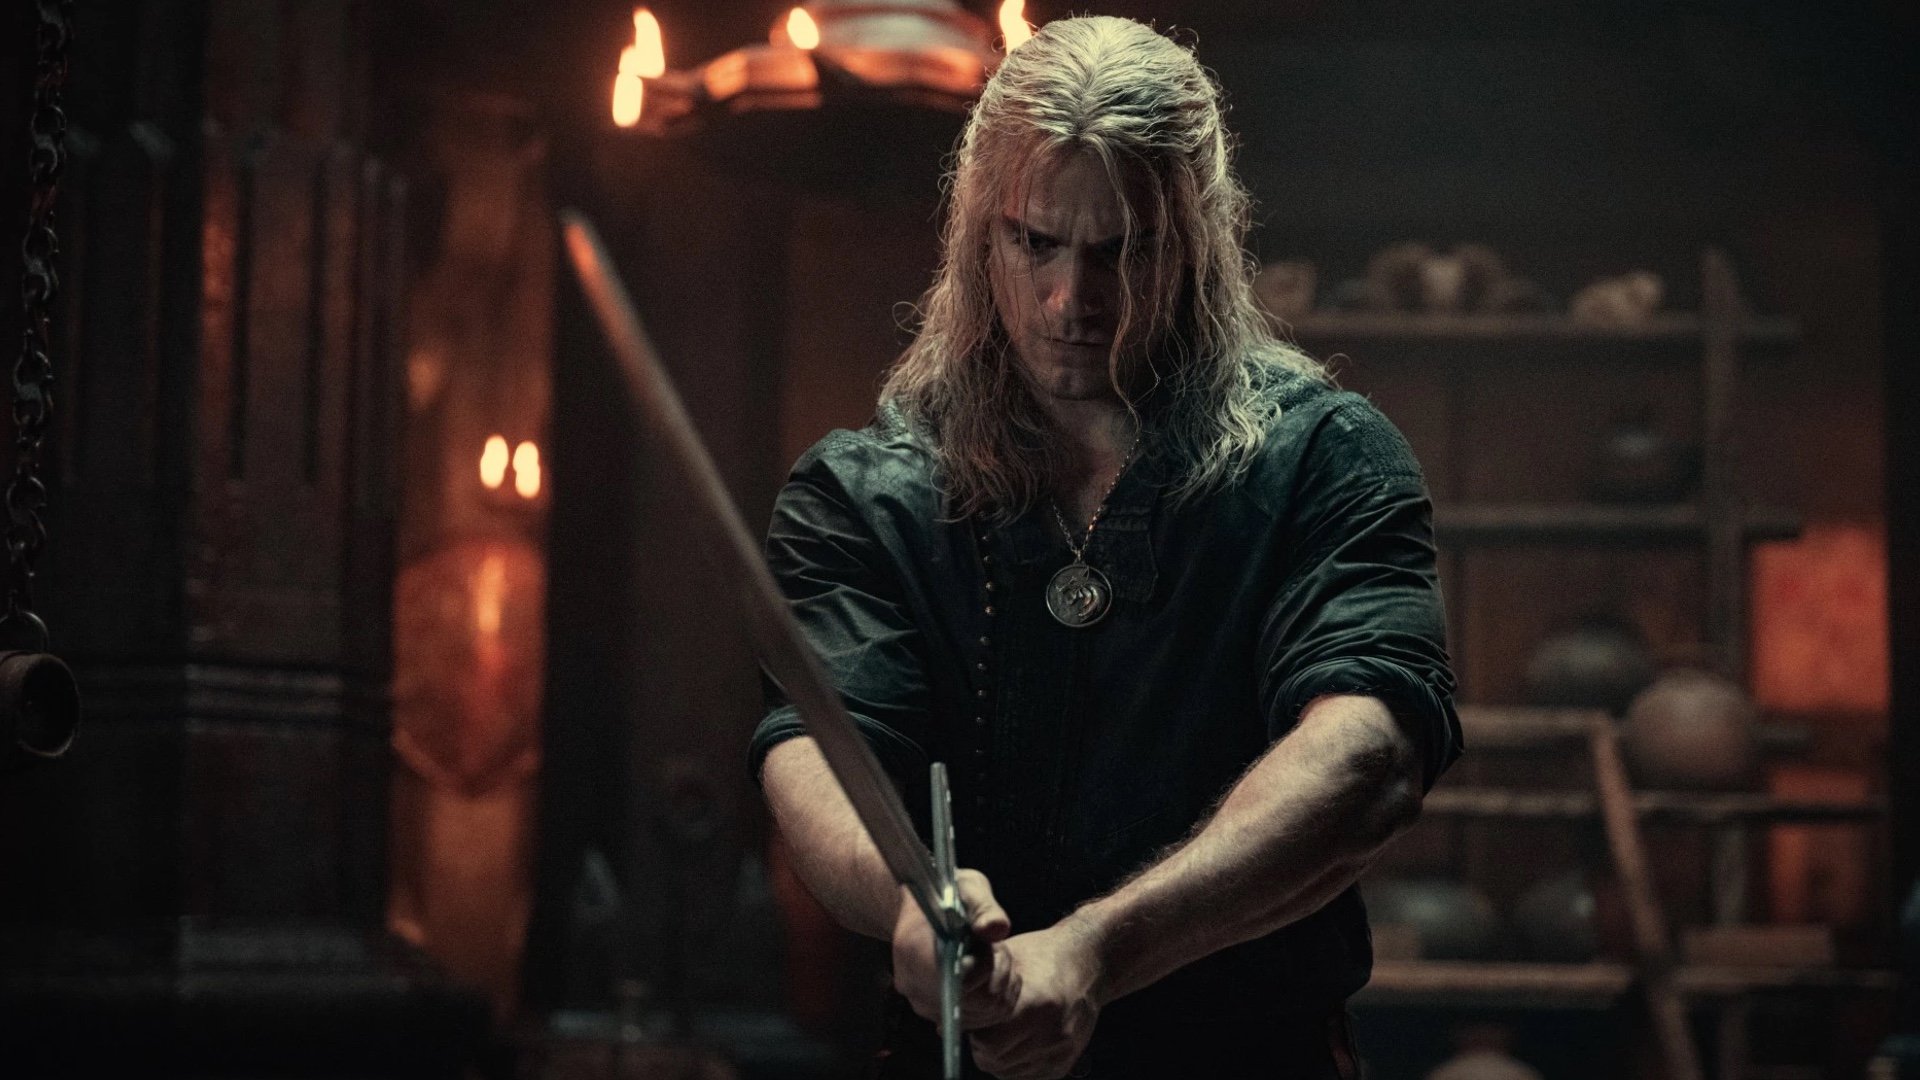 Liam Hemsworth to Replace Henry Cavill in Netflix's The Witcher